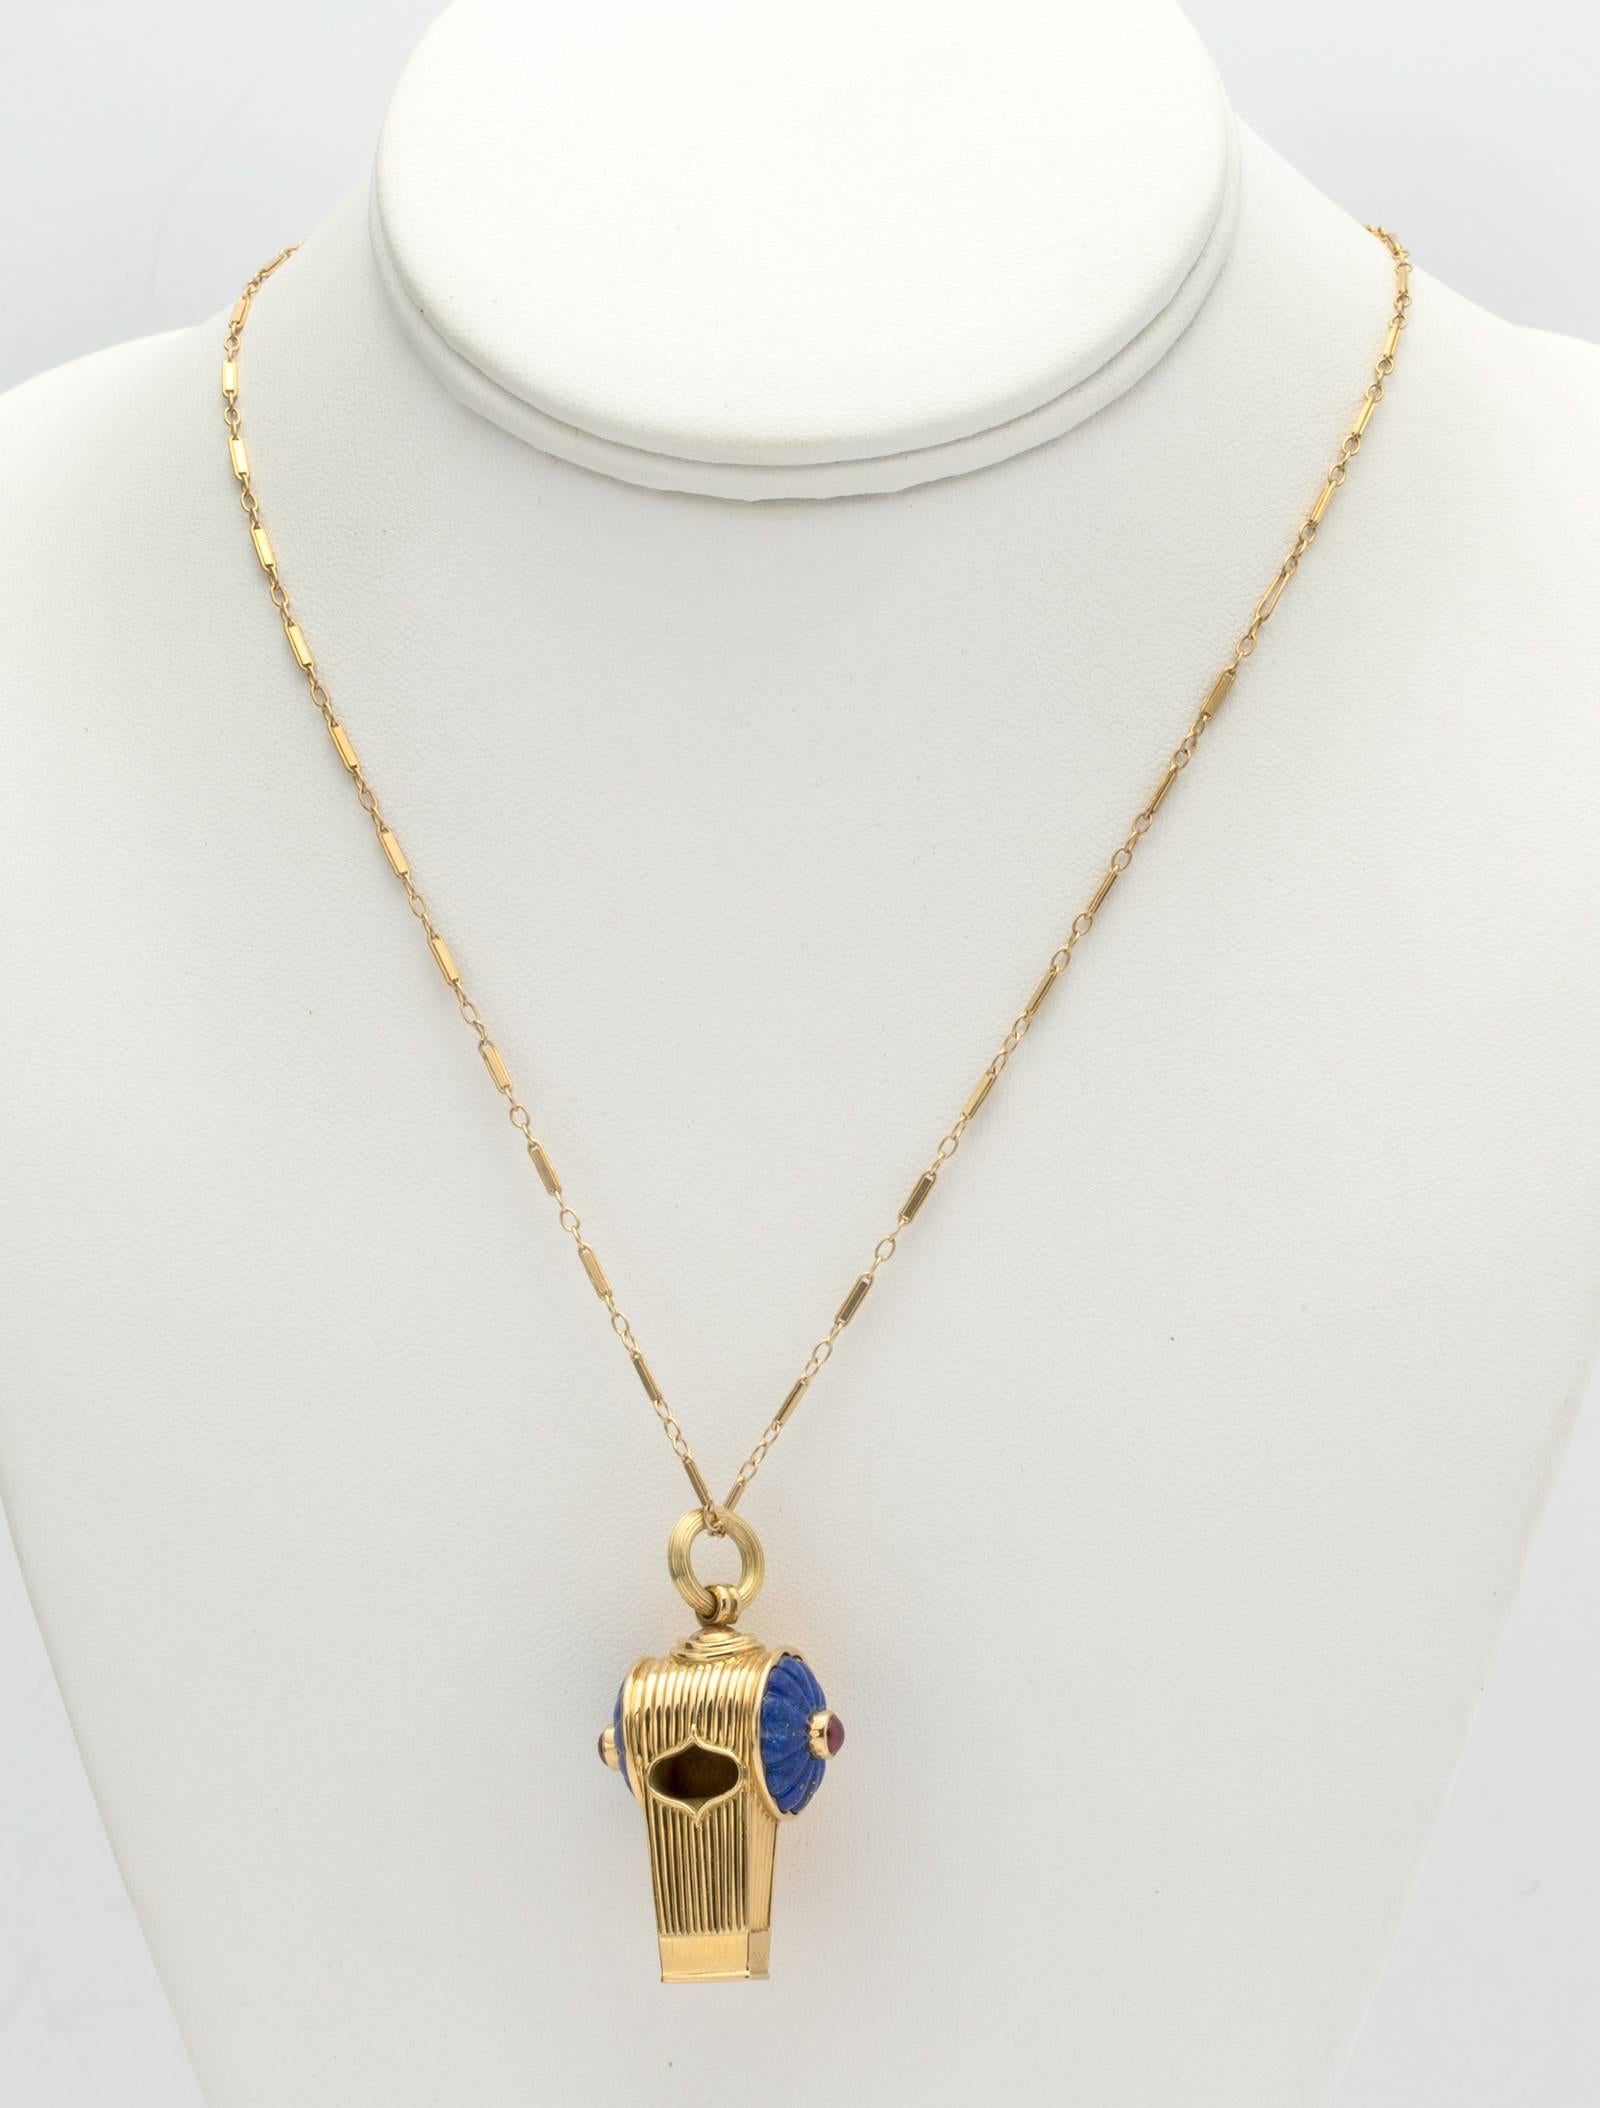 18k yellow gold whistle decorated with carved blue lapis and cabochon Ruby center.   It hangs from a 25